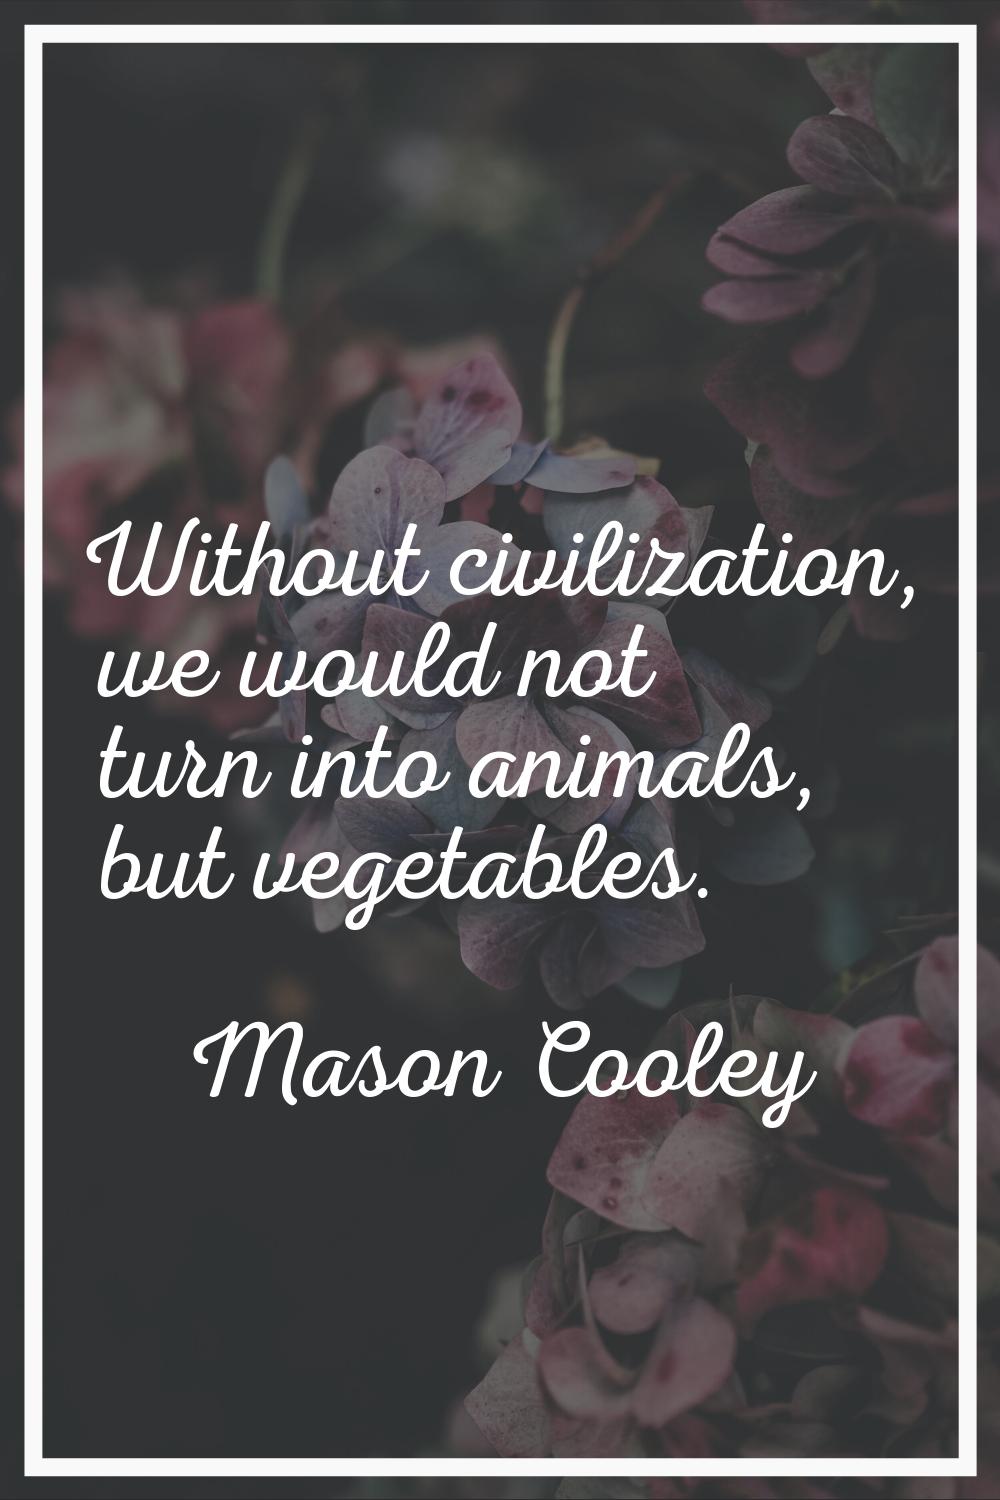 Without civilization, we would not turn into animals, but vegetables.